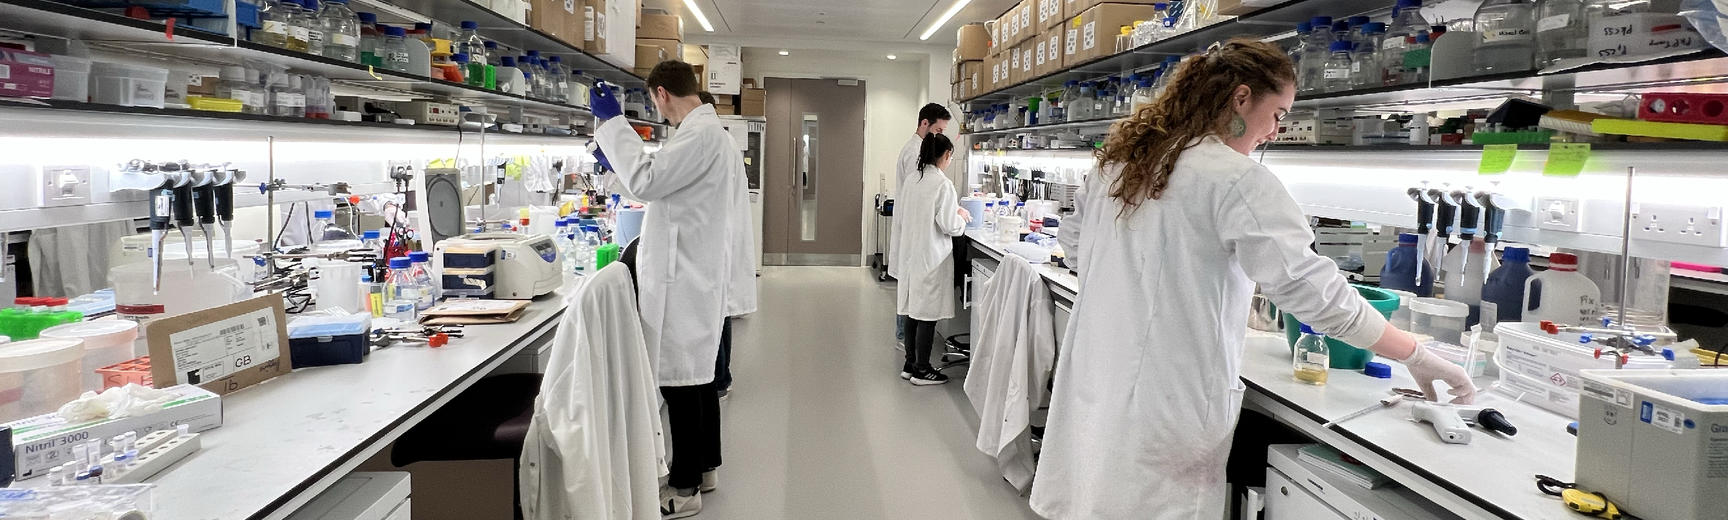 biochemistry researchers working in the lab